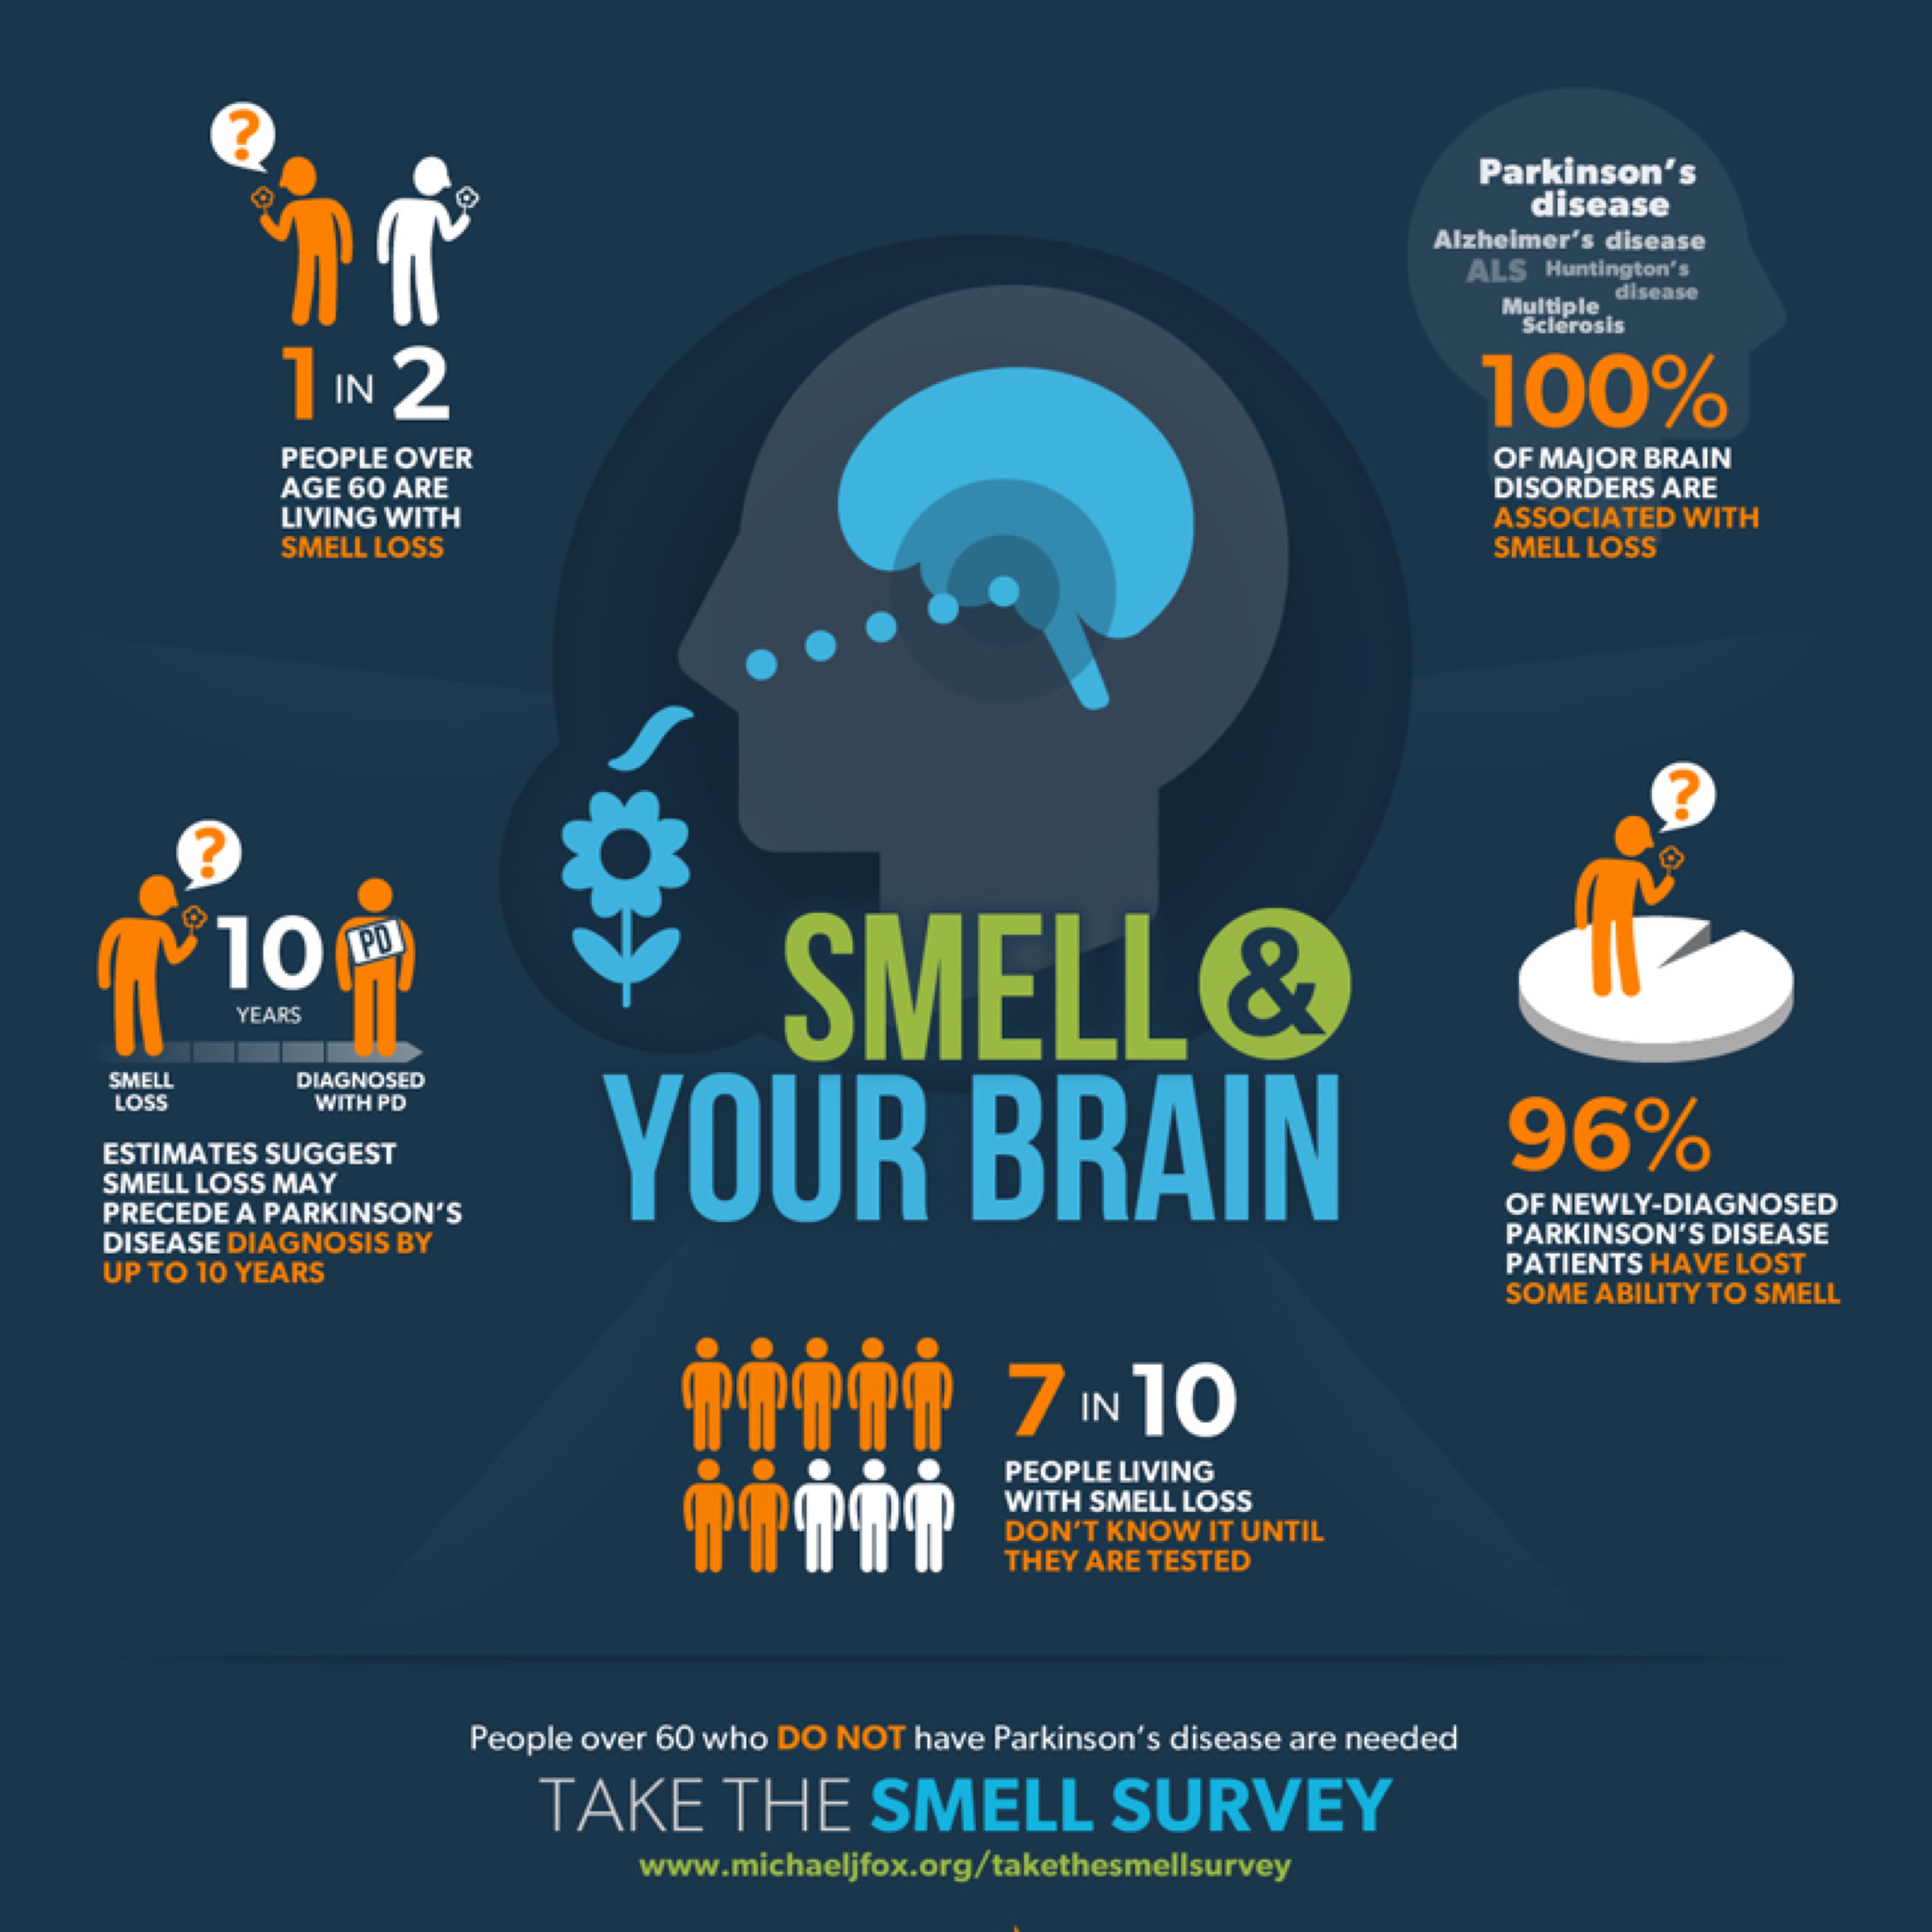 800x800MJFF- Smell and Your Brain Infographic 7-23-13 (5)